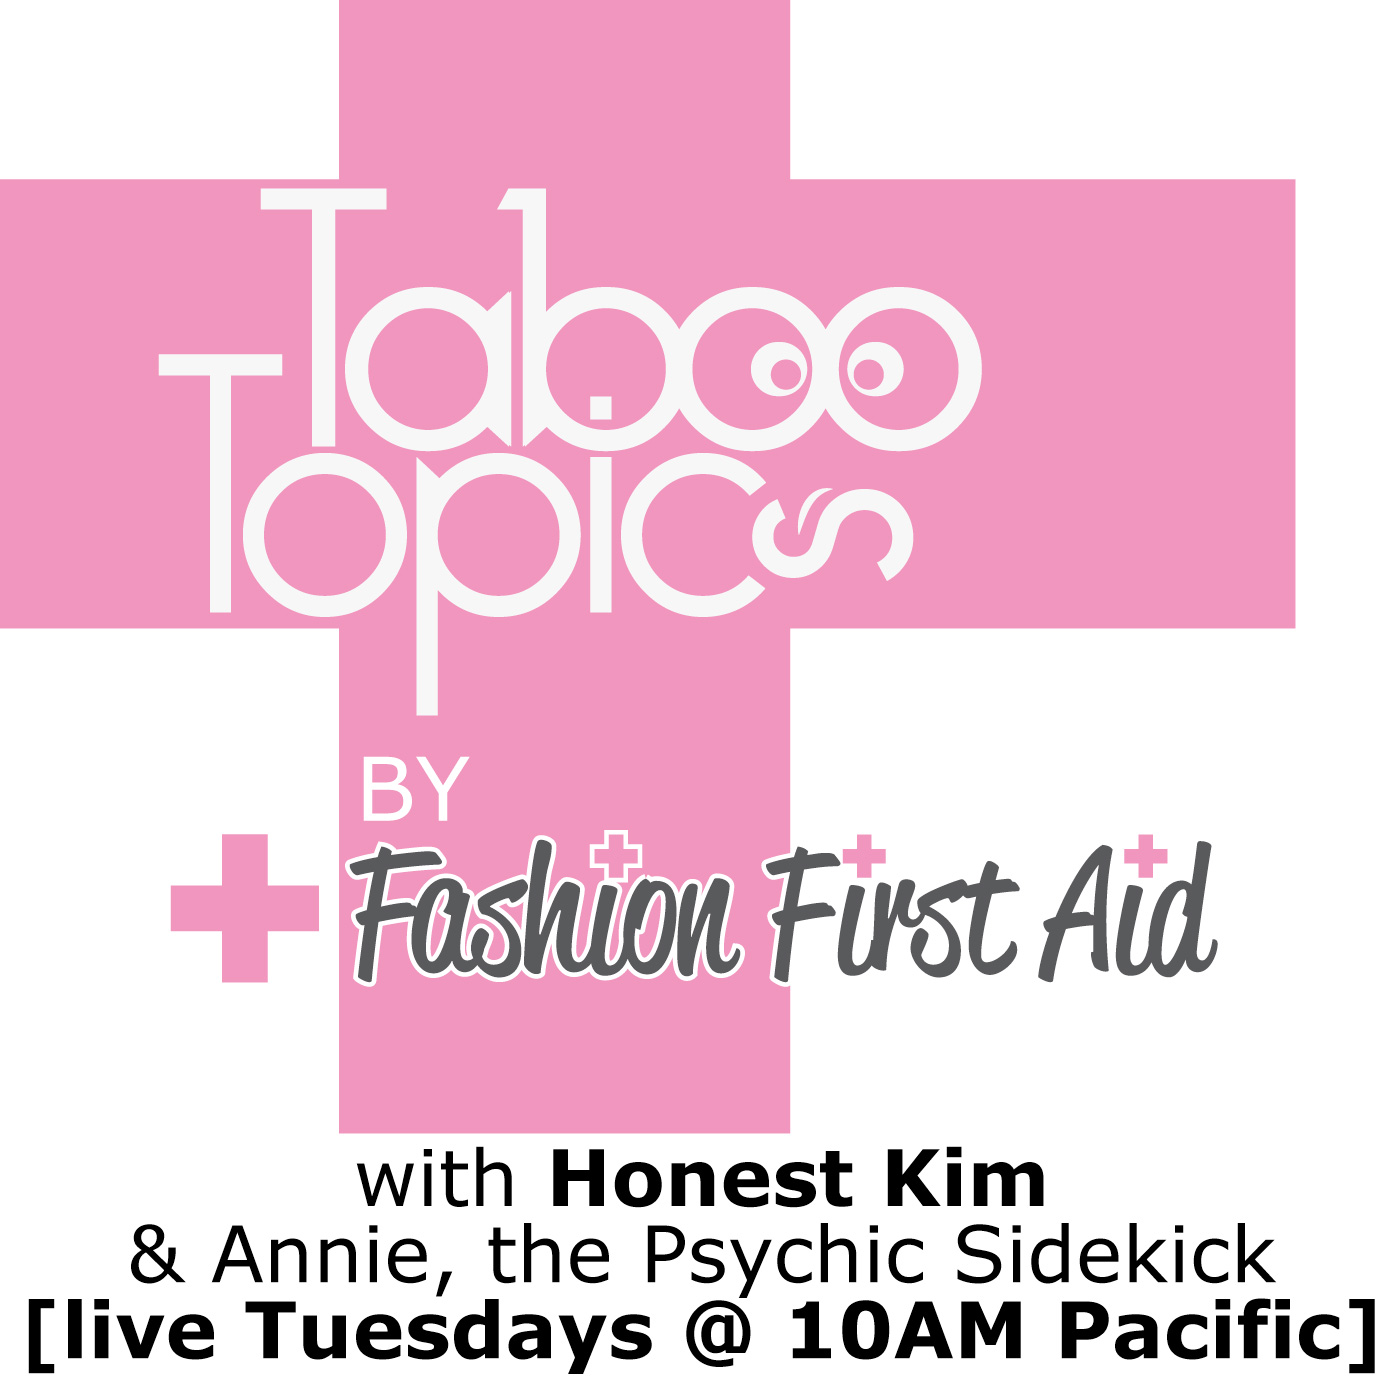 Fashion First Aid Tackles Taboo Topics In Fashion And Beauty Via Weekly